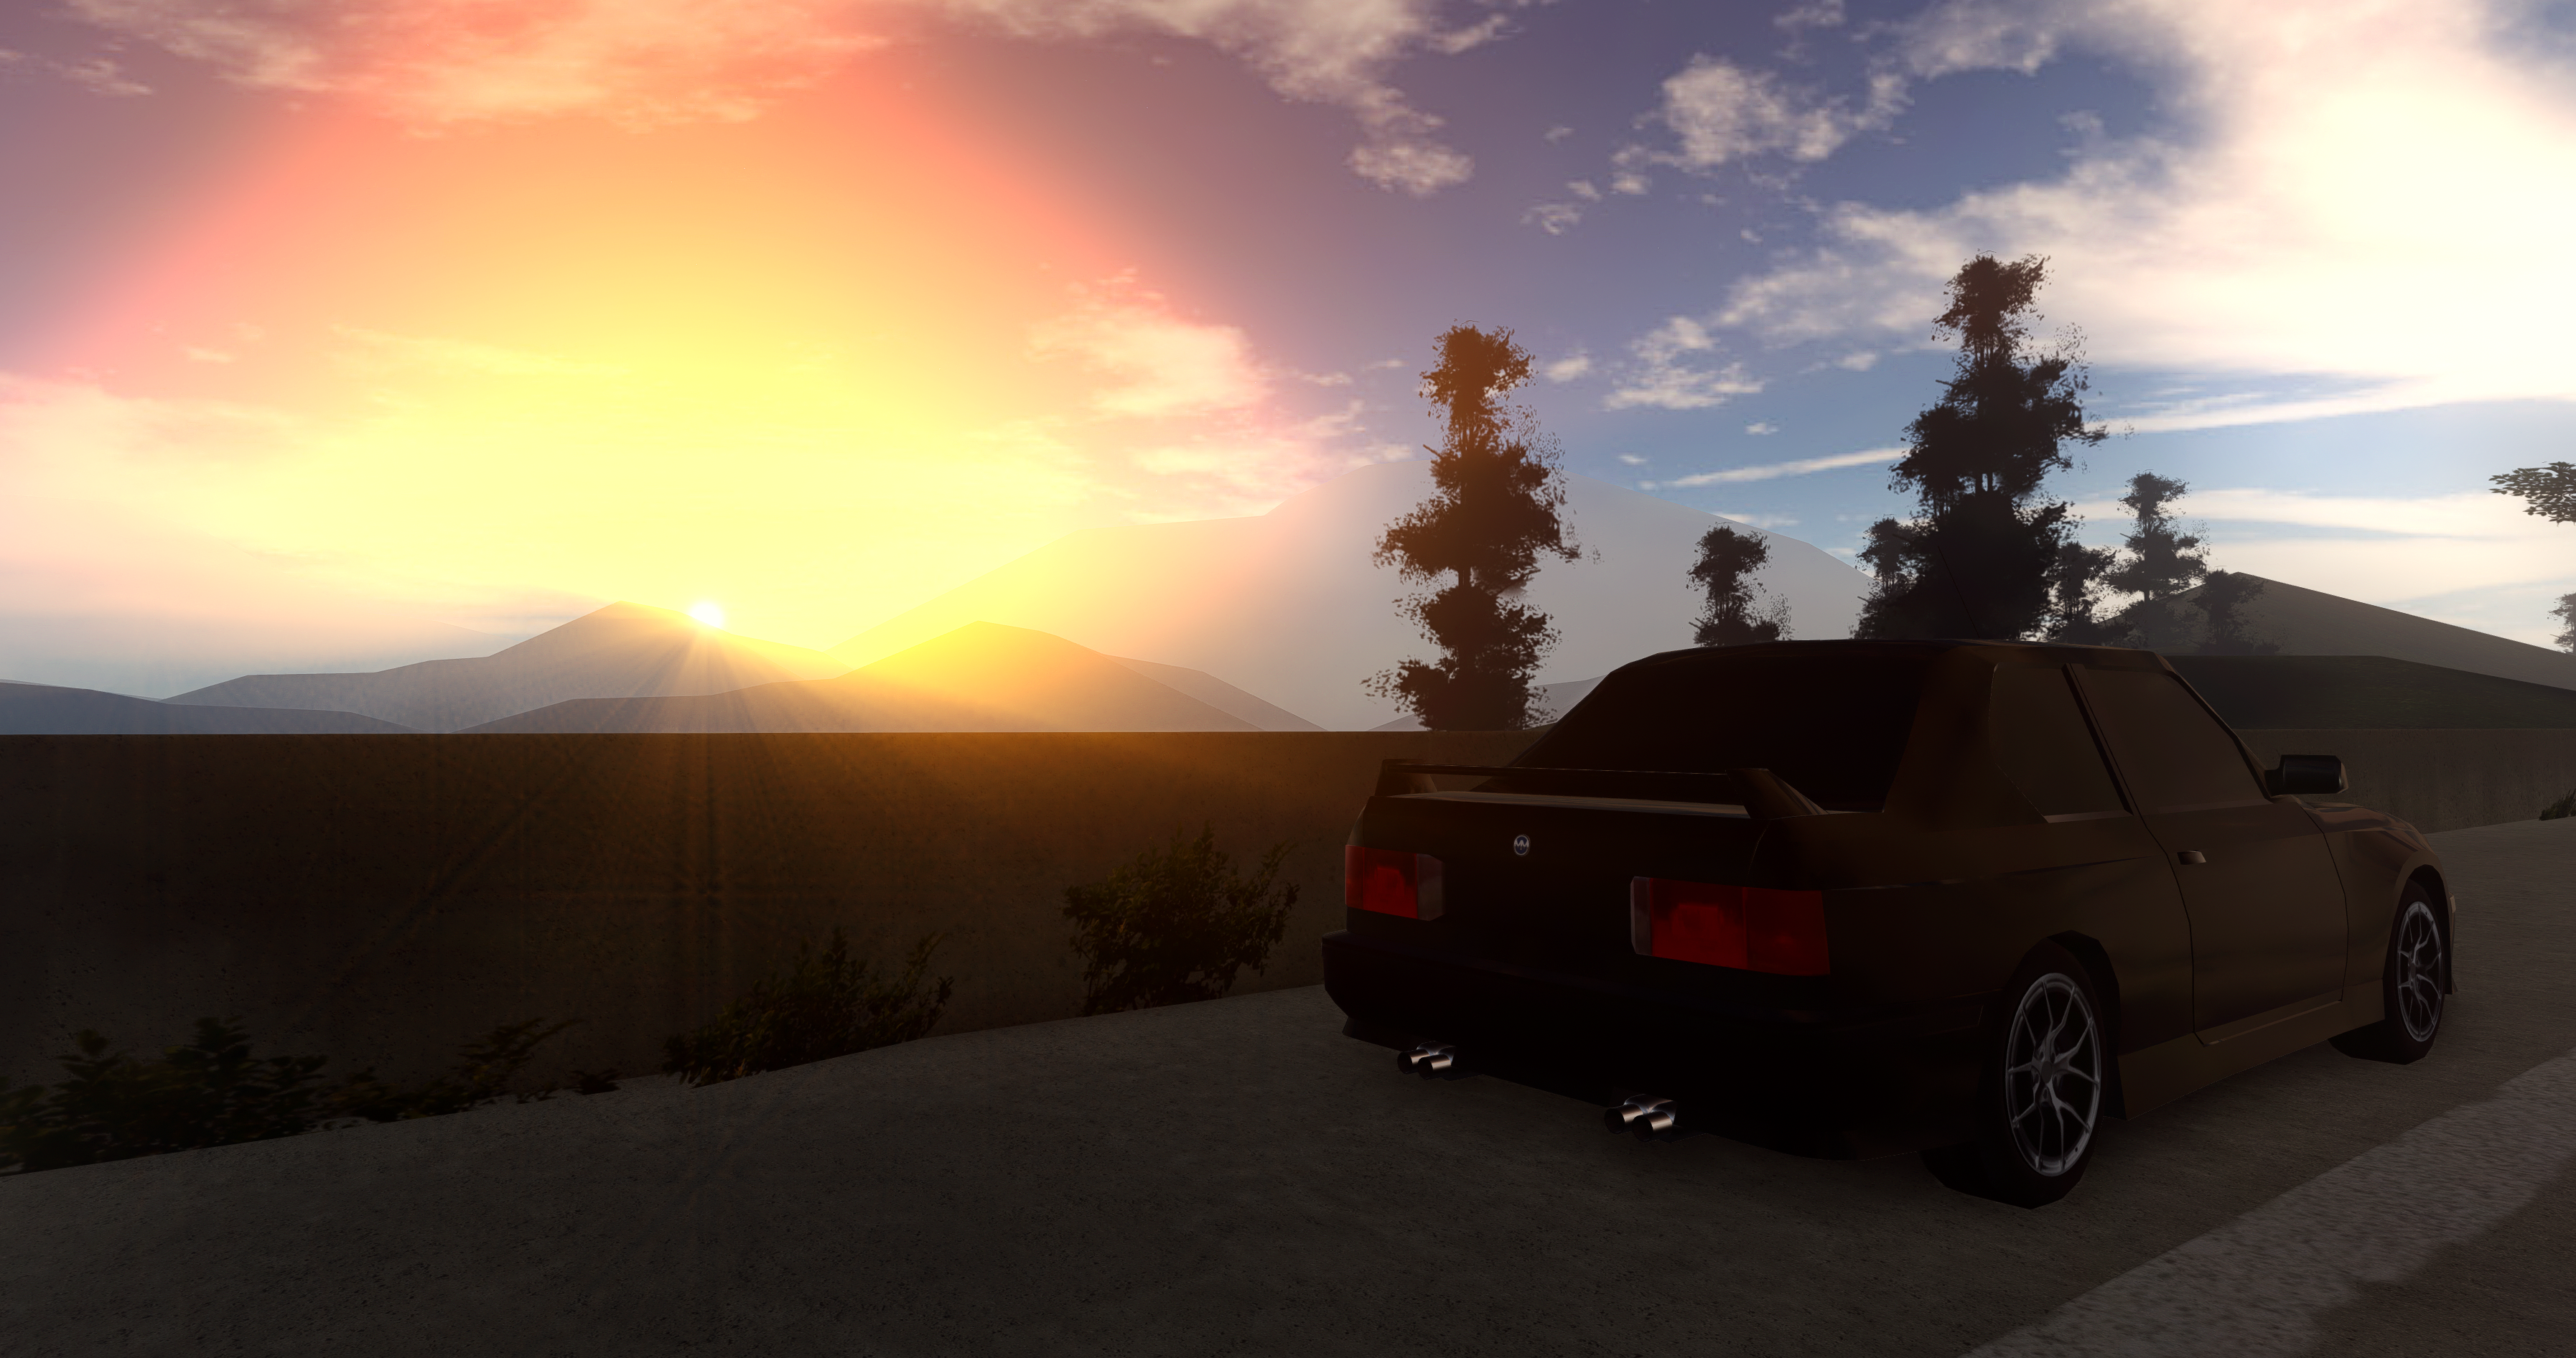 General 3588x1892 BMW E30 sunset mountains traffic barrier highway trees Roblox Pacifico (Roblox Game) clouds video games